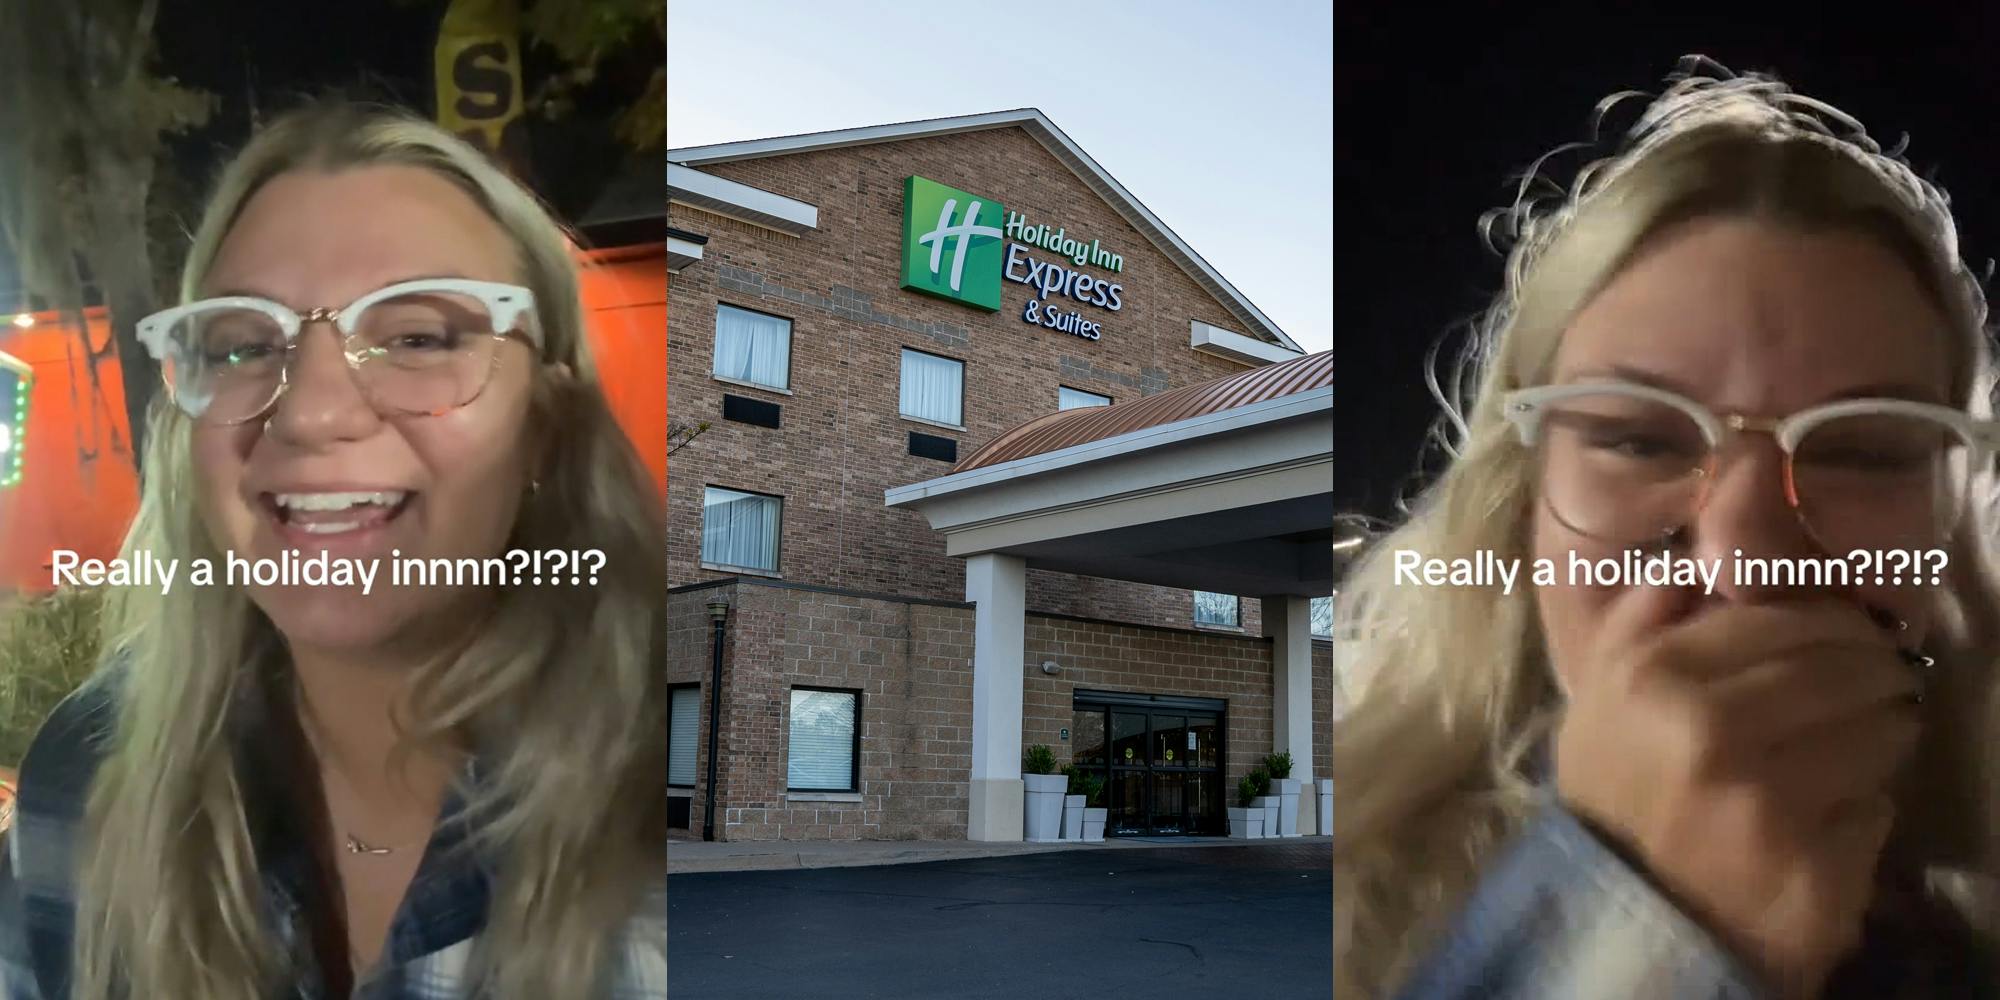 woman speaking outside with caption "Really a holiday innn?!?!?" (l) Holiday Inn with sign (c) woman speaking outside with caption "Really a holiday innn?!?!?" (r)